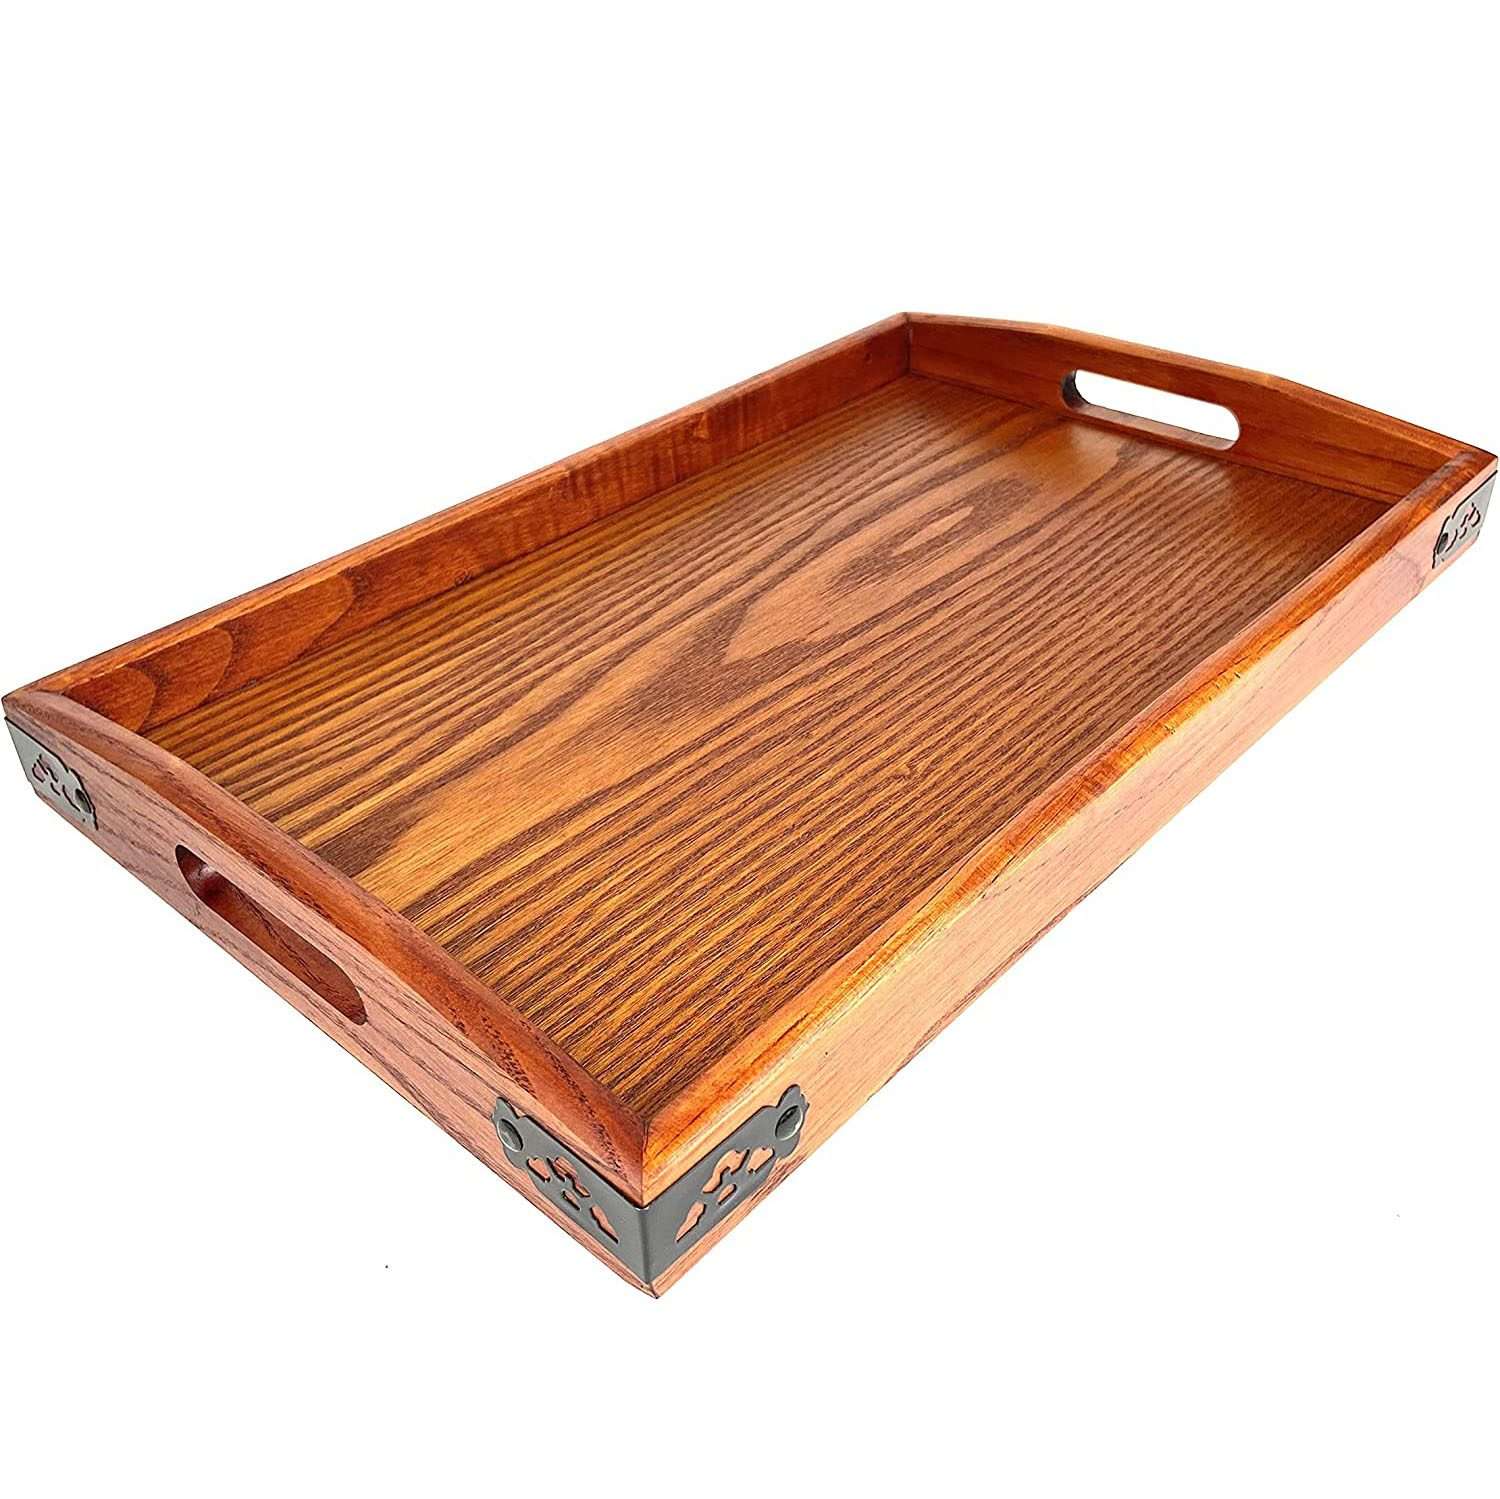 Wooden Serving Tray with Handles | Rectangle Butler Tray